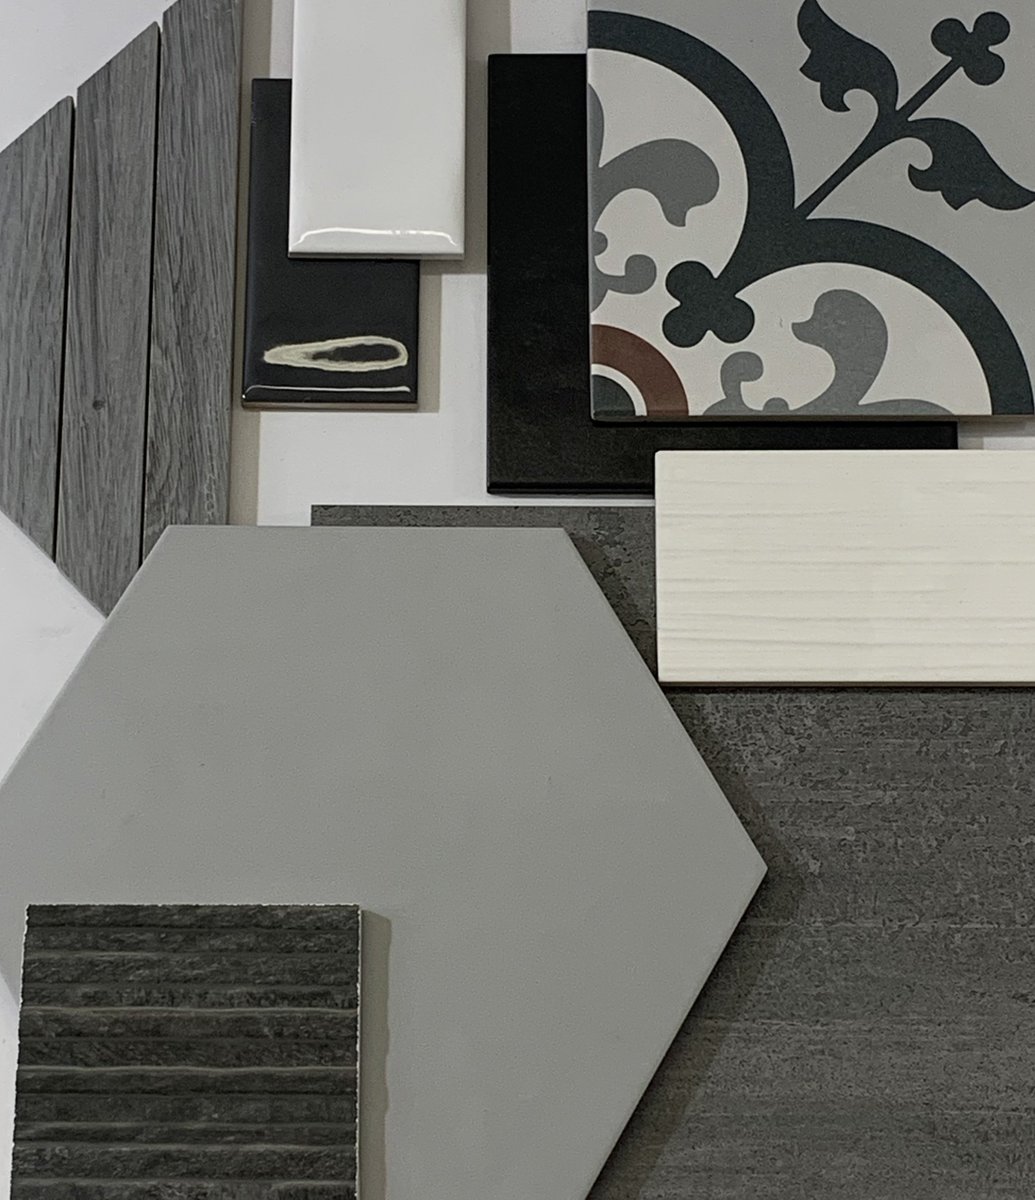 A mixture of texture and shapes...
tones of black, gray and white... Sevilla Cementine for an exclusive touch... #caltilecenter #valmoriceramicadesign #cementine #tilemoodboard #tile #homedecor #homedesign #geometric #shadesofgraydesigns #cementinetiles #madeinitaly #newhomedecor